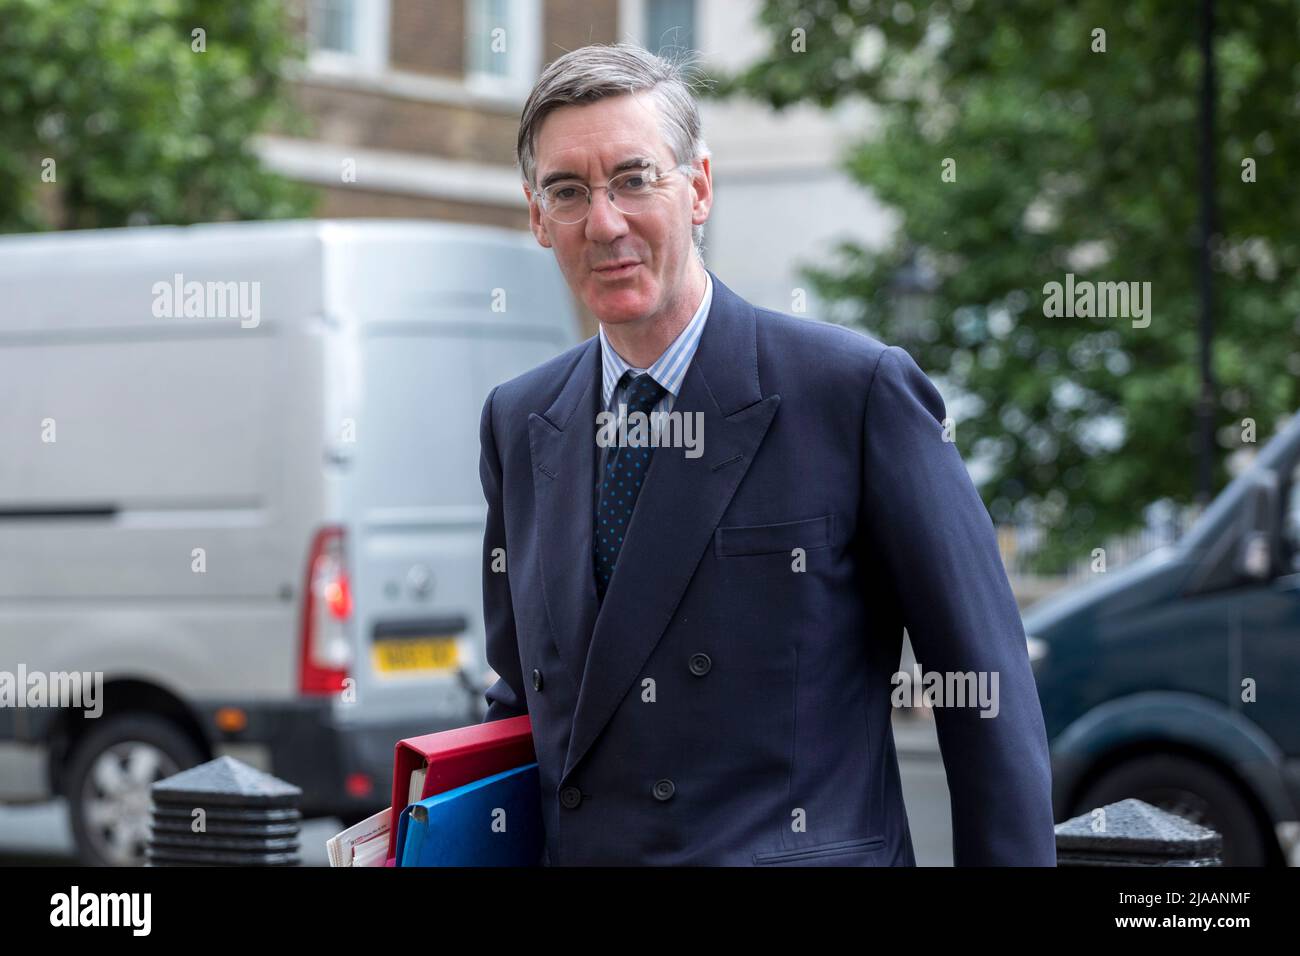 Jacob Rees-Mogg MP, Minister of State (Minister for Brexit Opportunities and Government Efficiency), arrives at the Cabinet Office ahead of weekly Cab Stock Photo